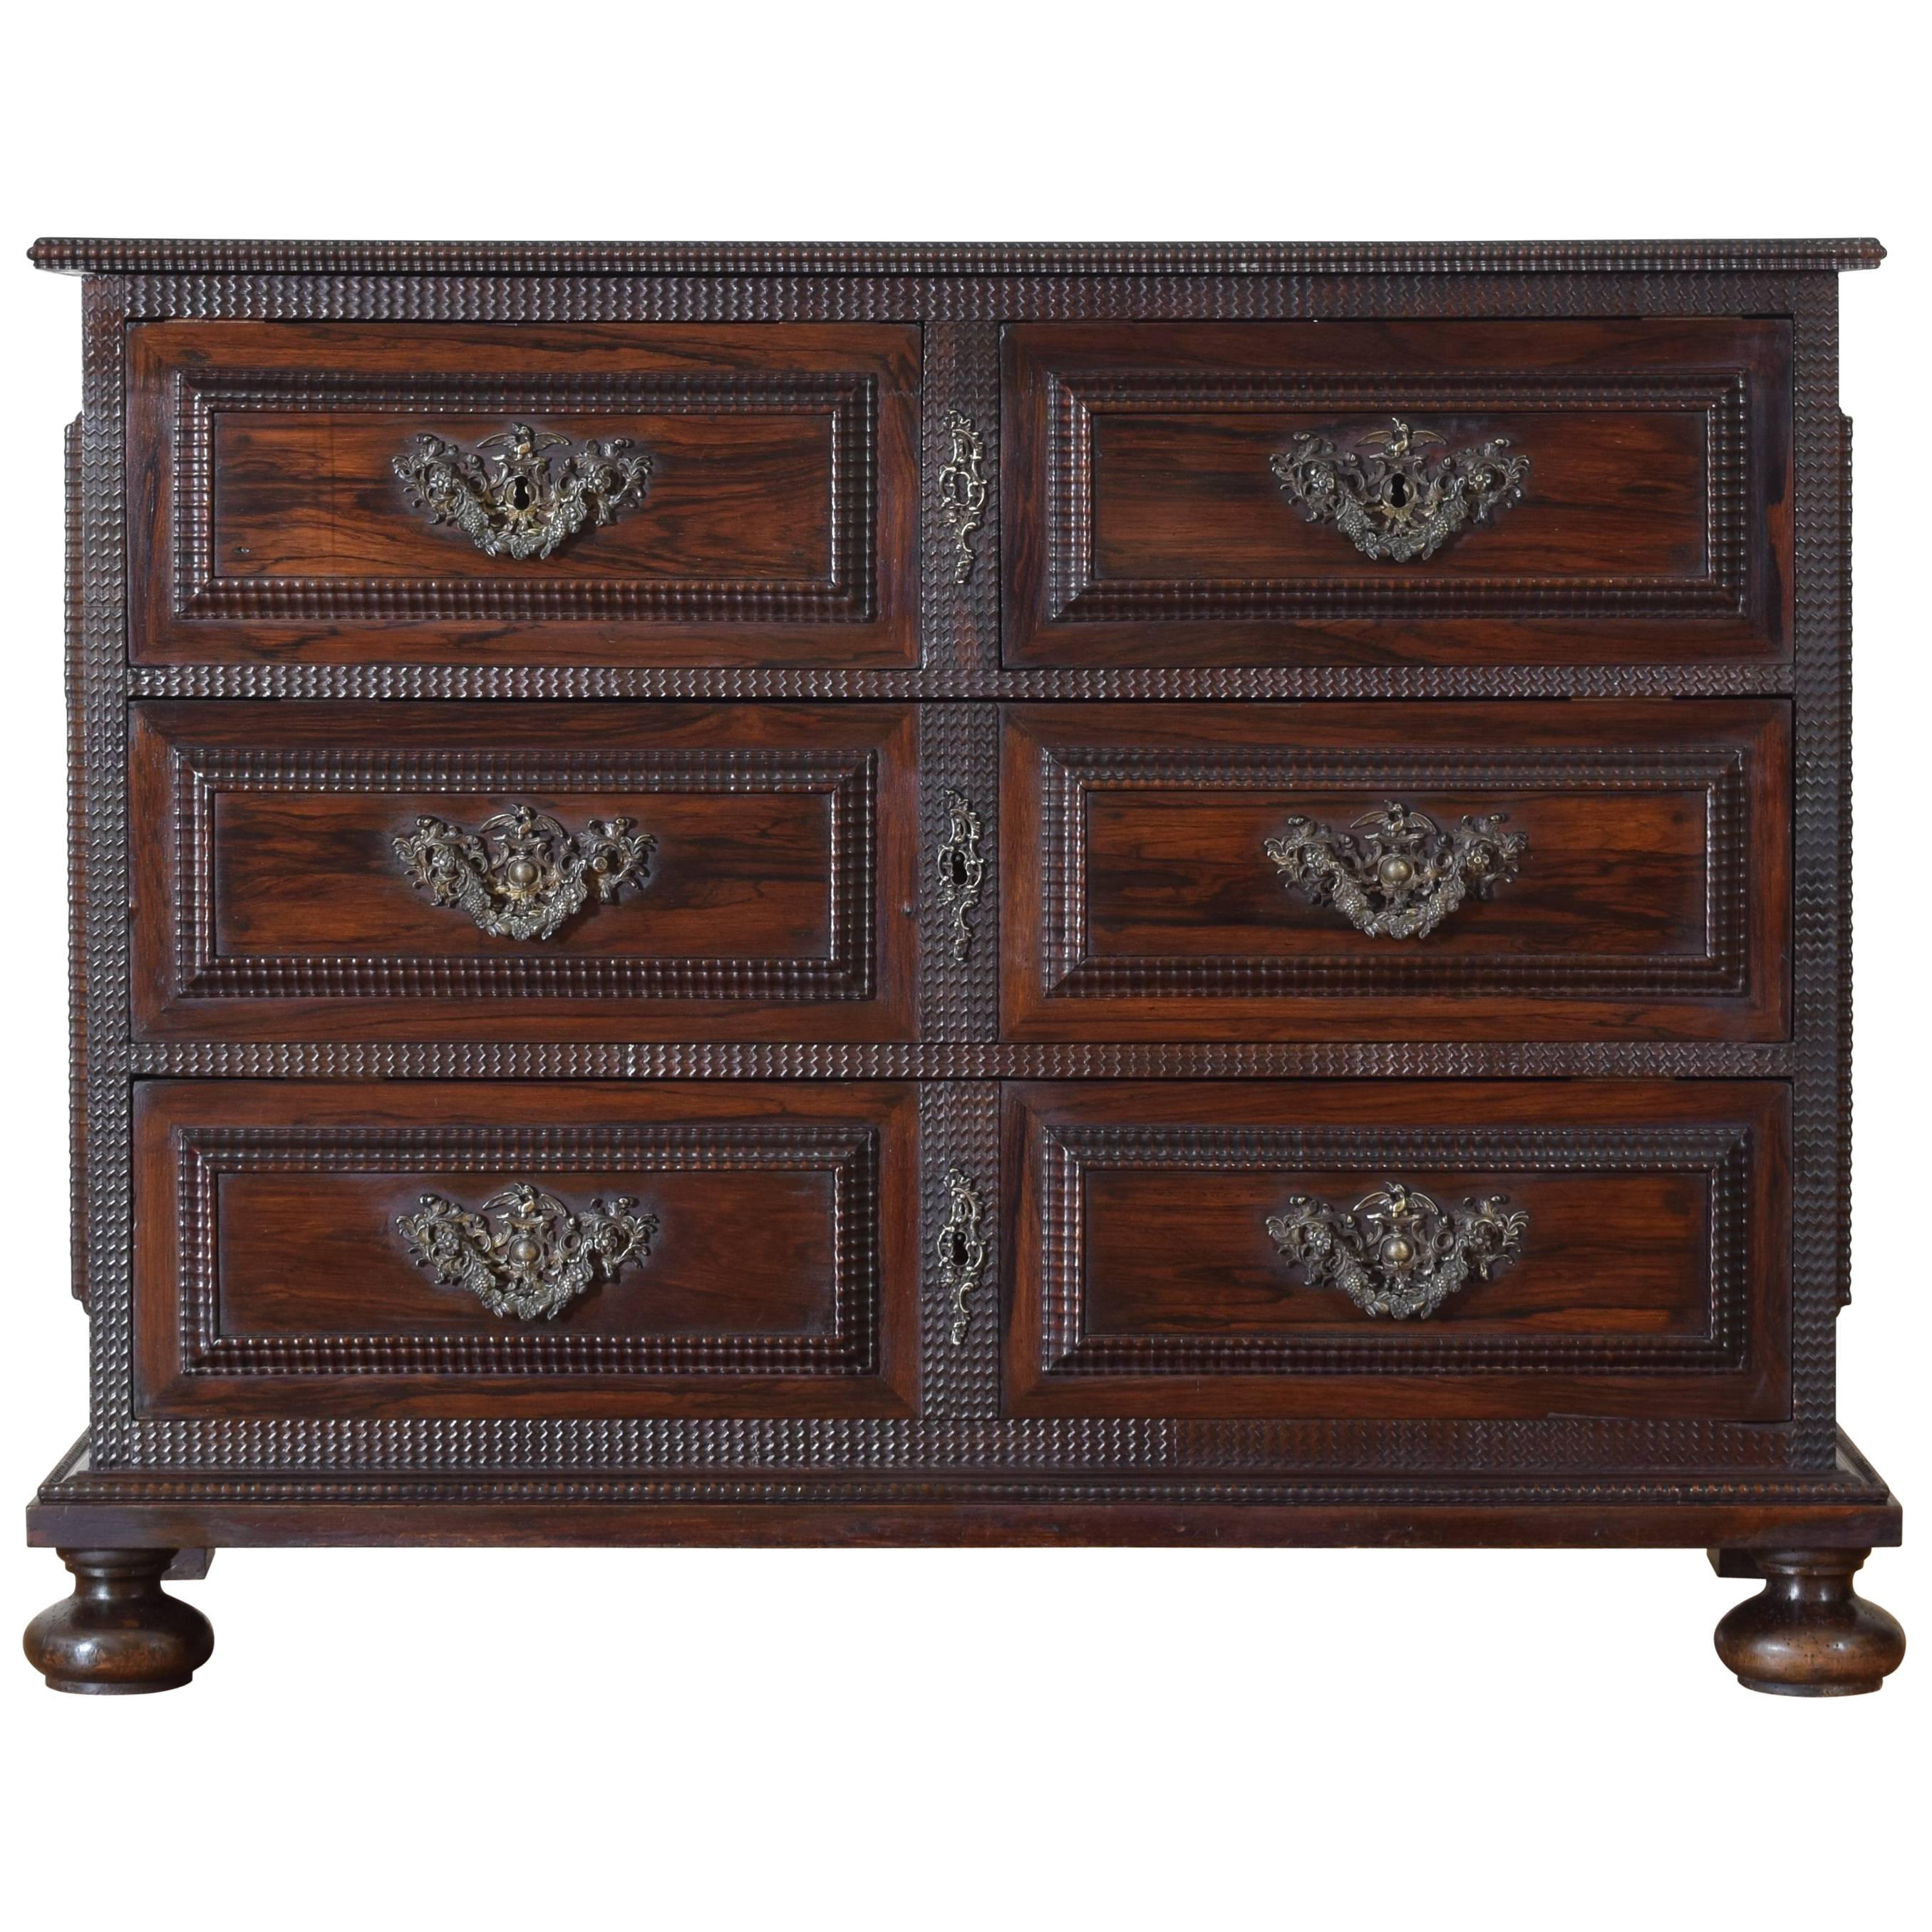 Portuguese Rosewood Four-Drawer Commode, 18th Century